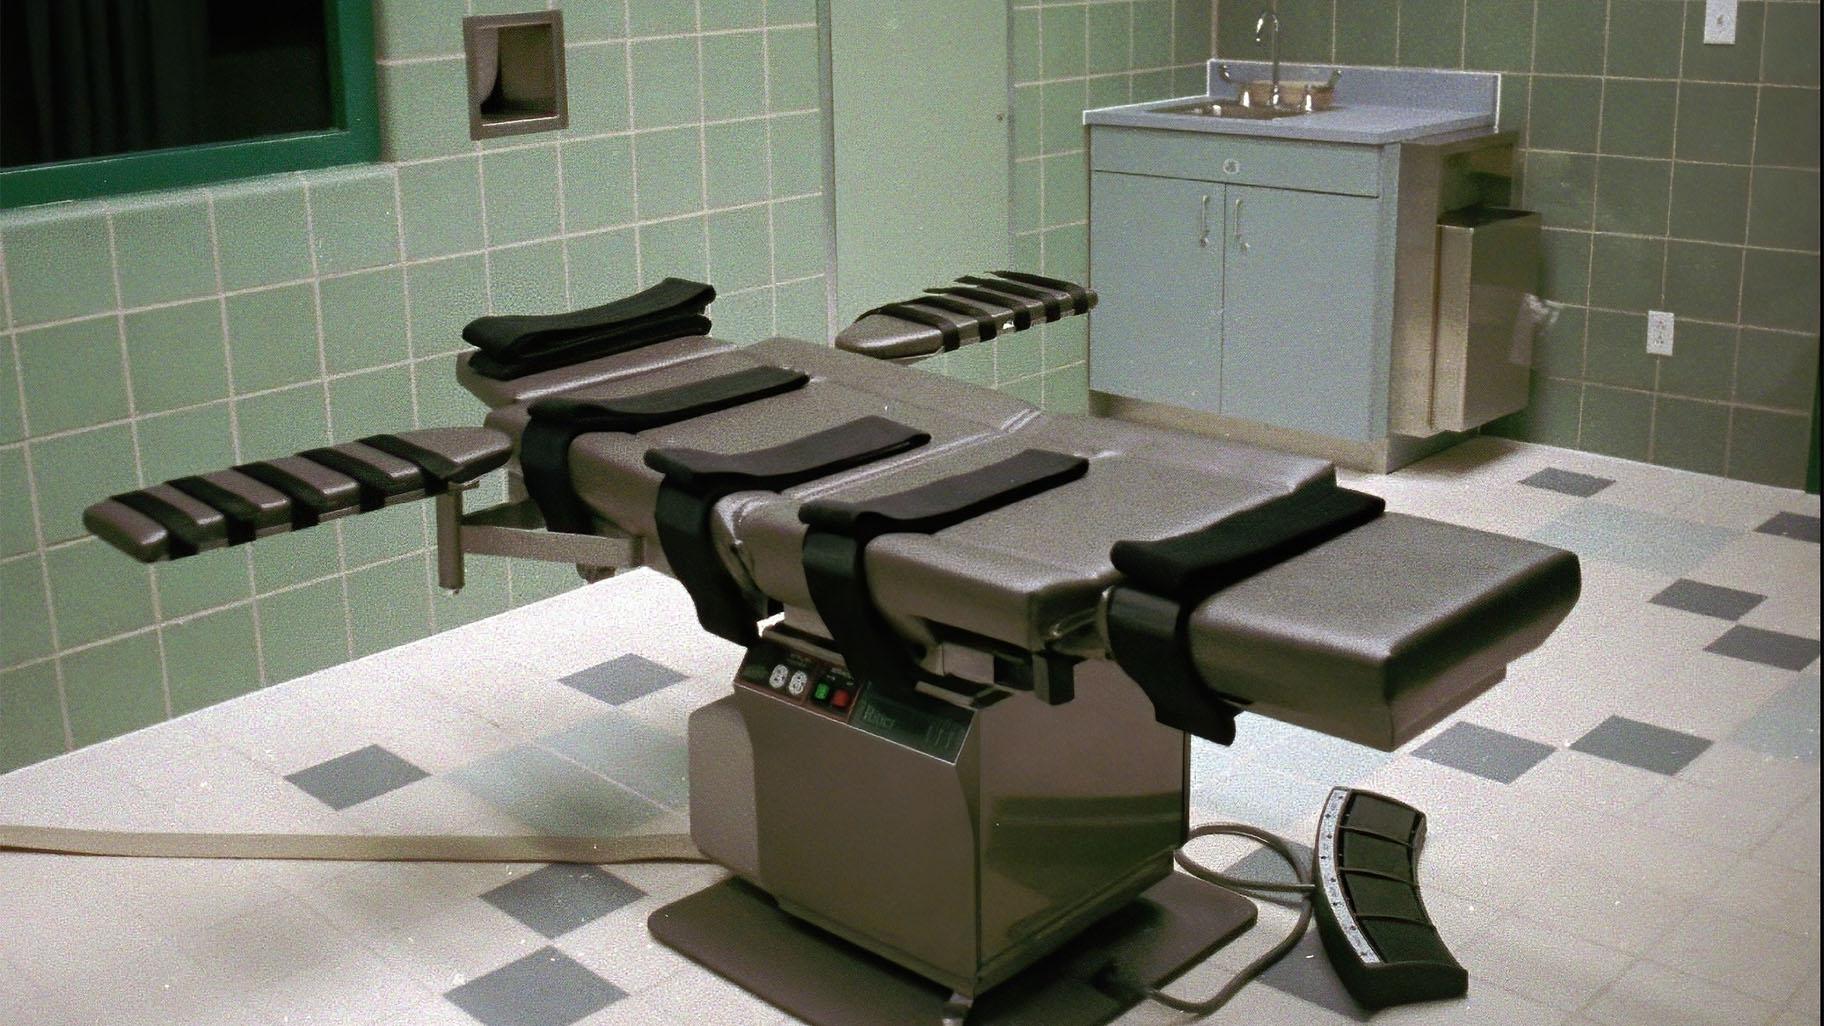 FILE - This March 22, 1995, file photo shows the interior of the execution chamber in the U.S. Penitentiary in Terre Haute, Ind. (AP Photo / Chuck Robinson, File)